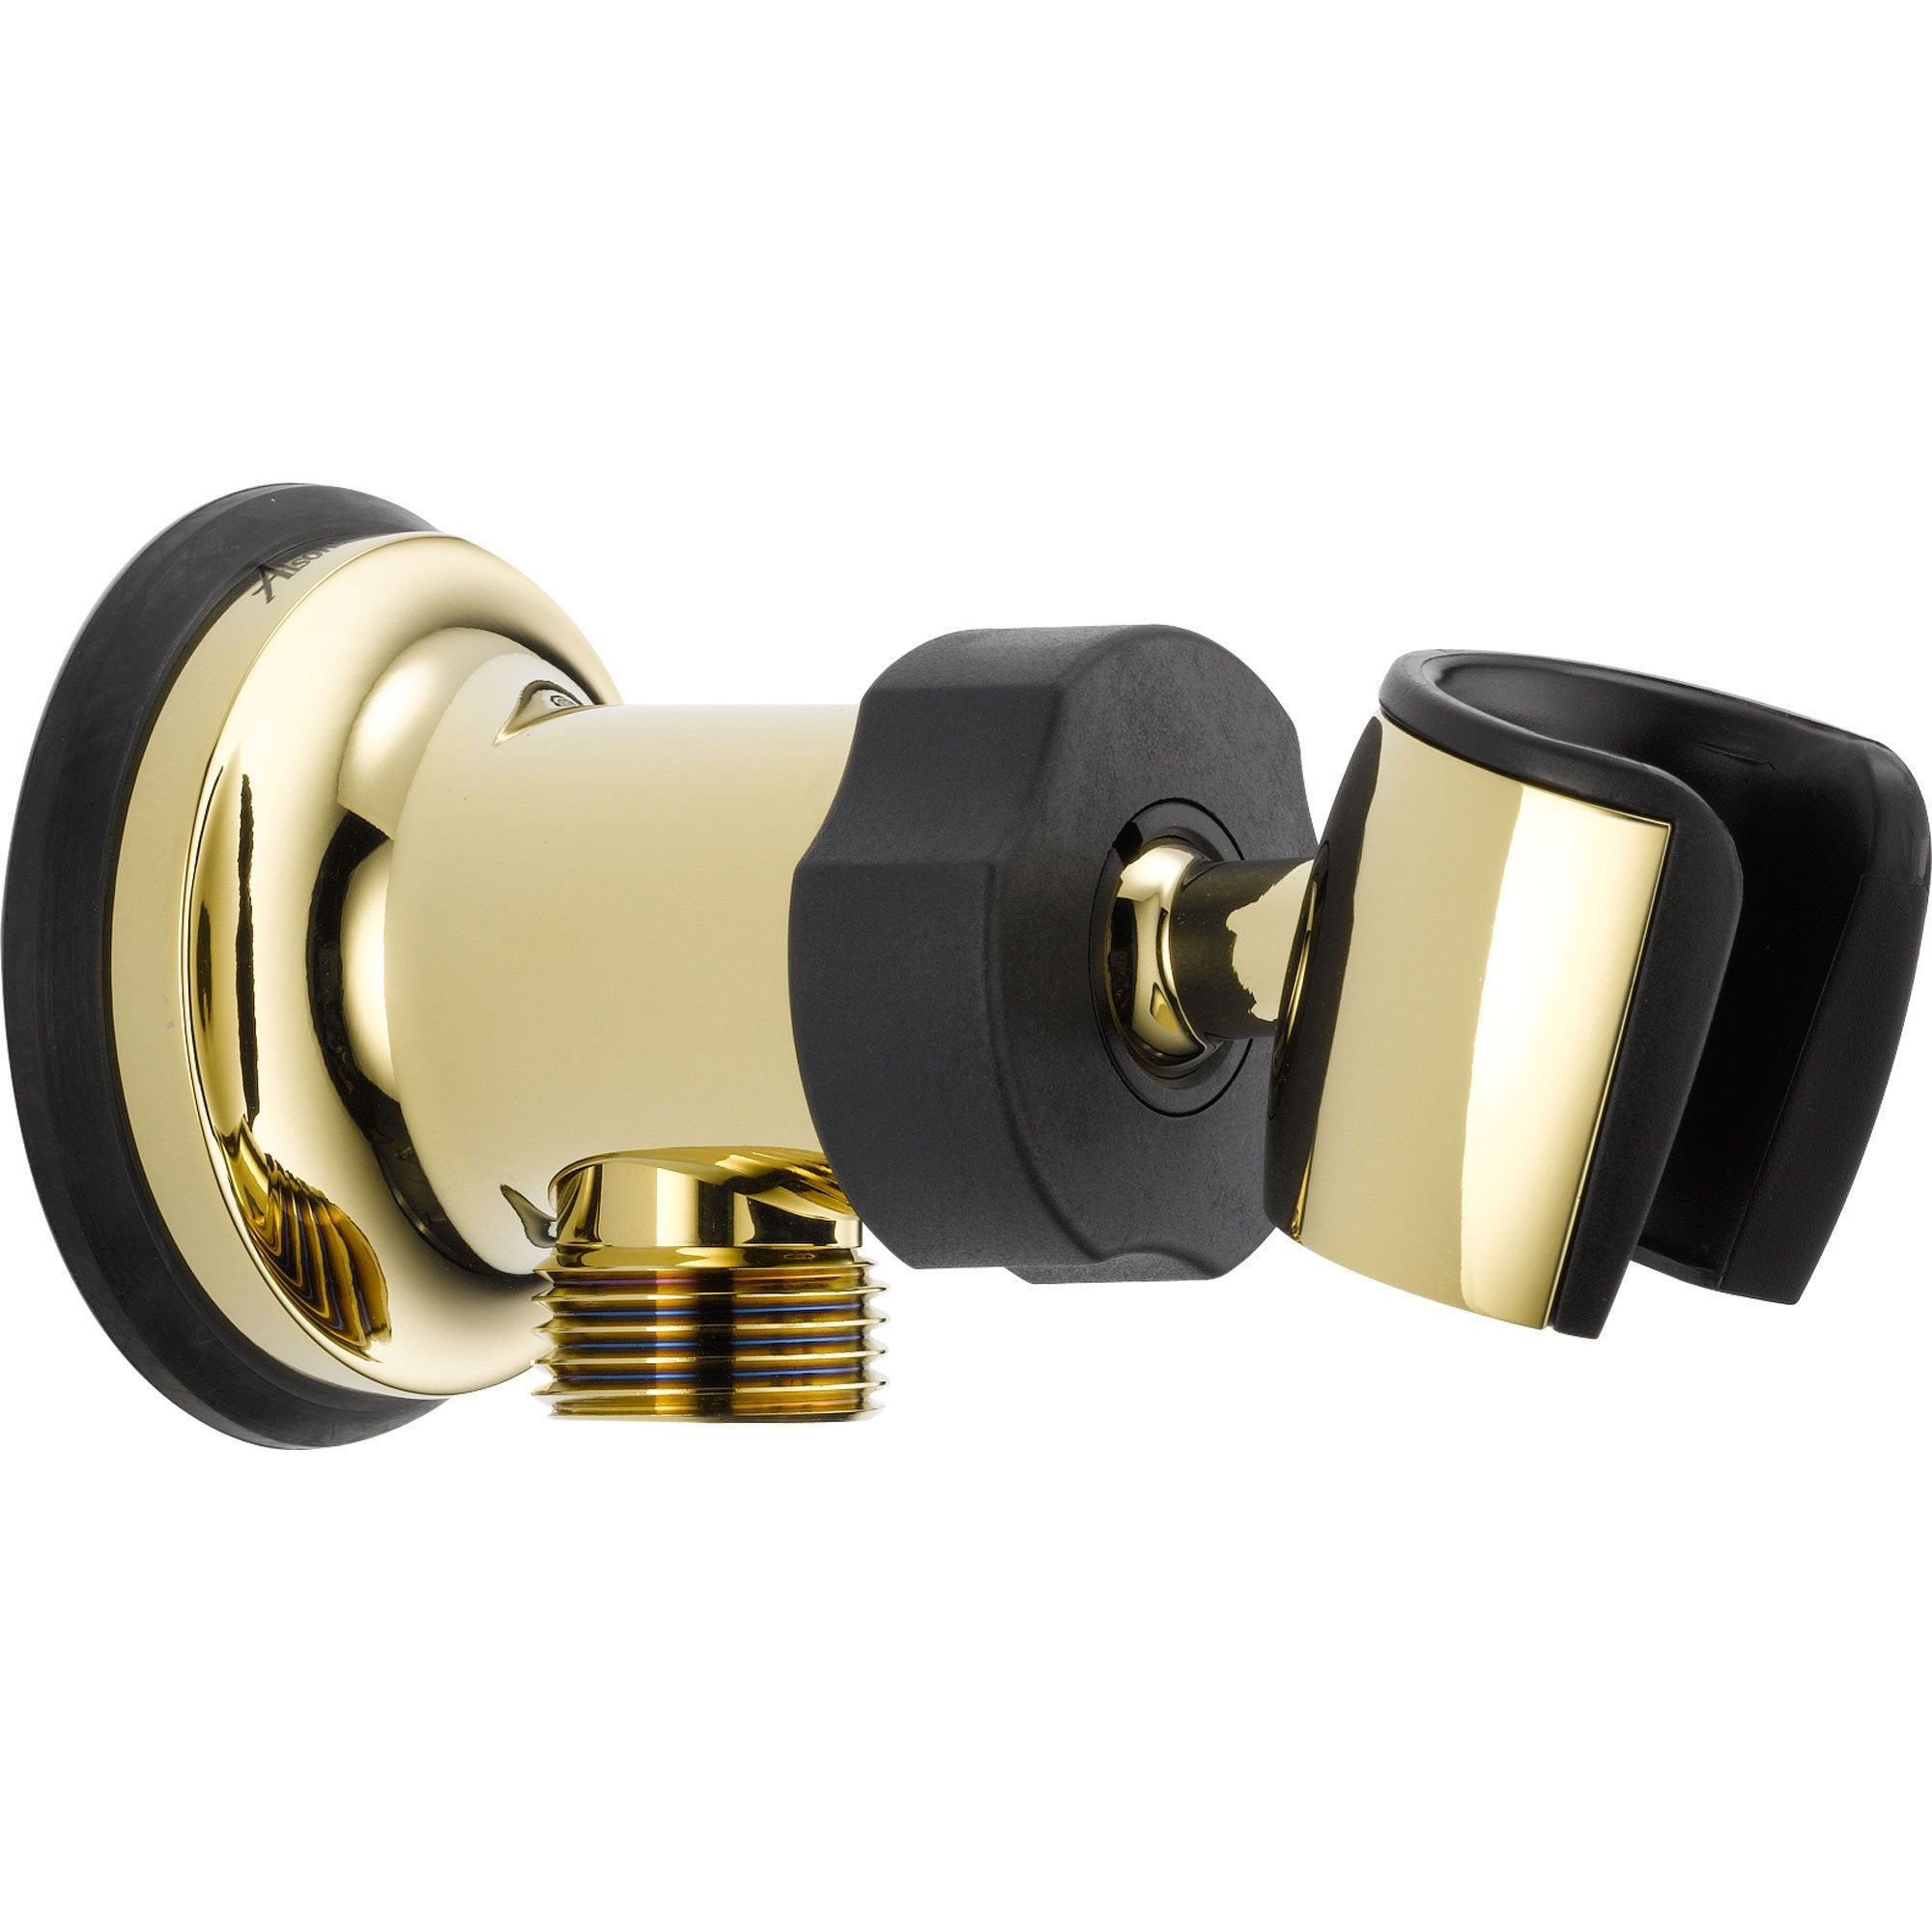 Delta Wall Supply Elbow Mount for Handshower in Polished Brass 561367